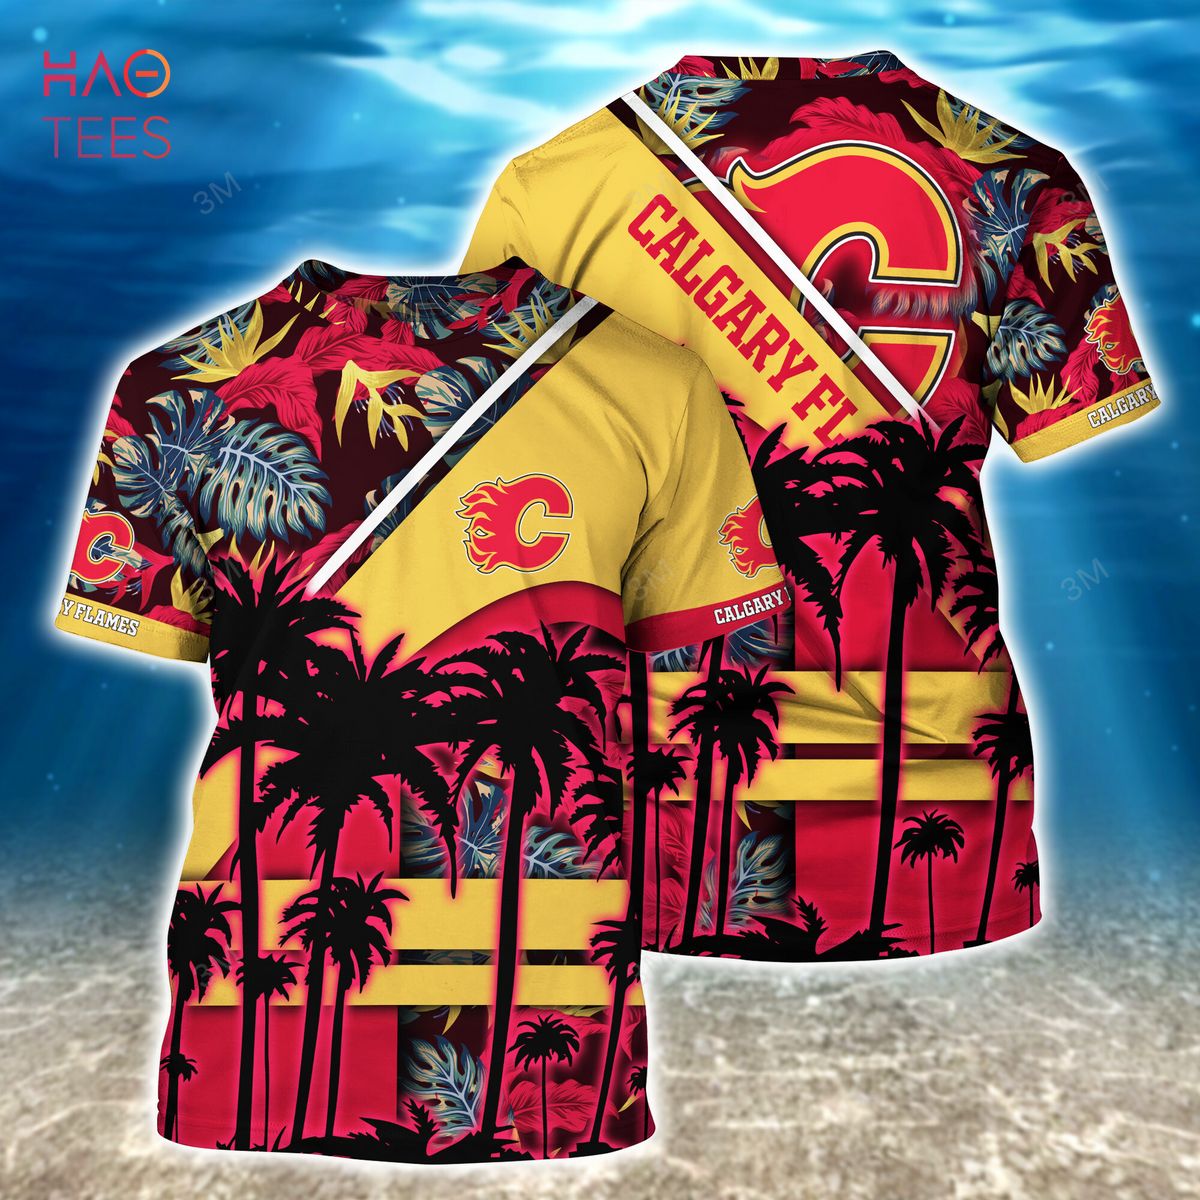 LIMITED] Carolina Hurricanes NHL-Summer Hawaiian Shirt And Shorts, Stress  Blessed Obsessed For Fans